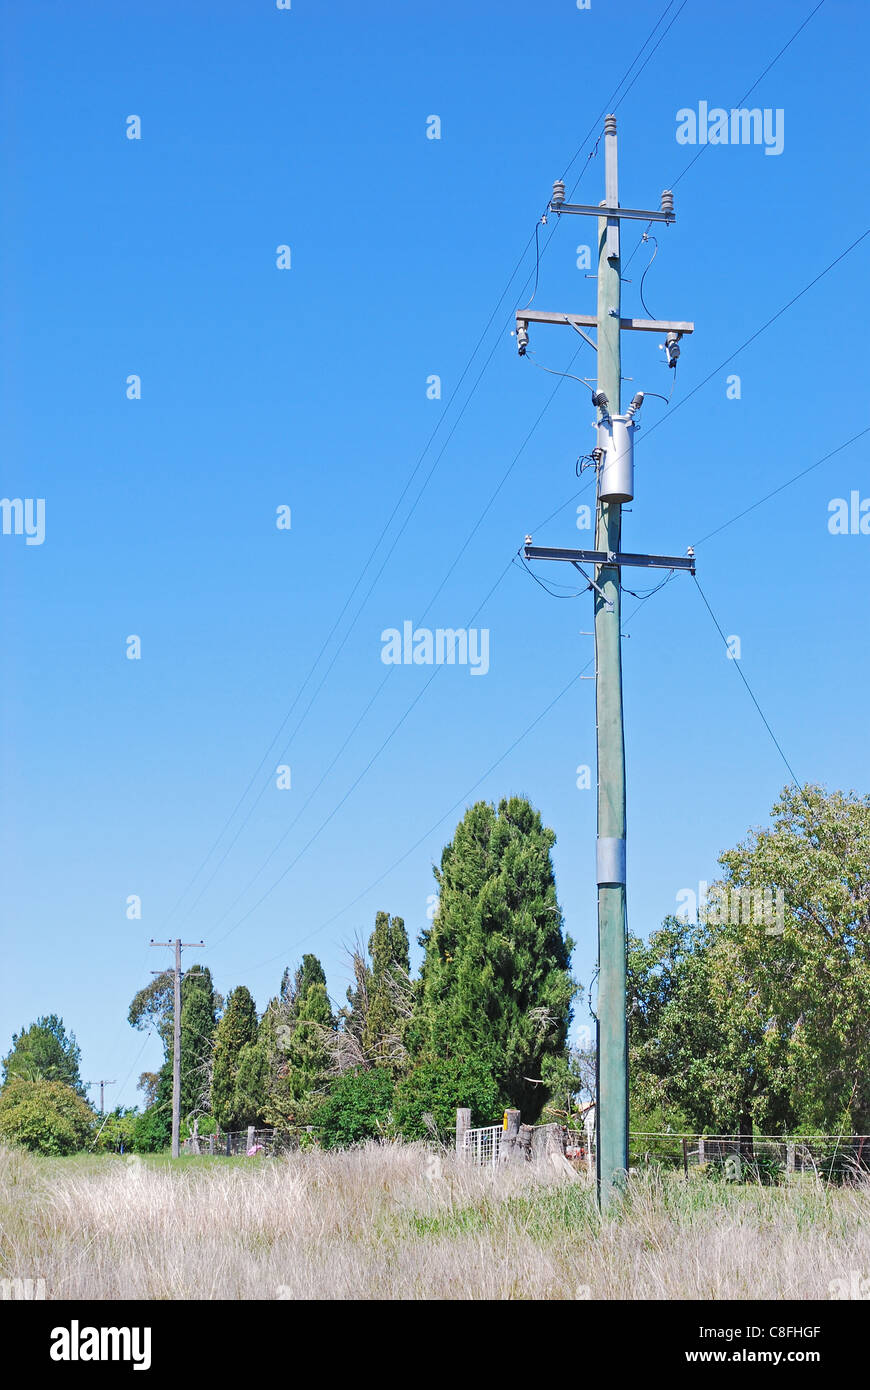 Power pole with 11,000 volts to 240 volt transformer Stock Photo - Alamy